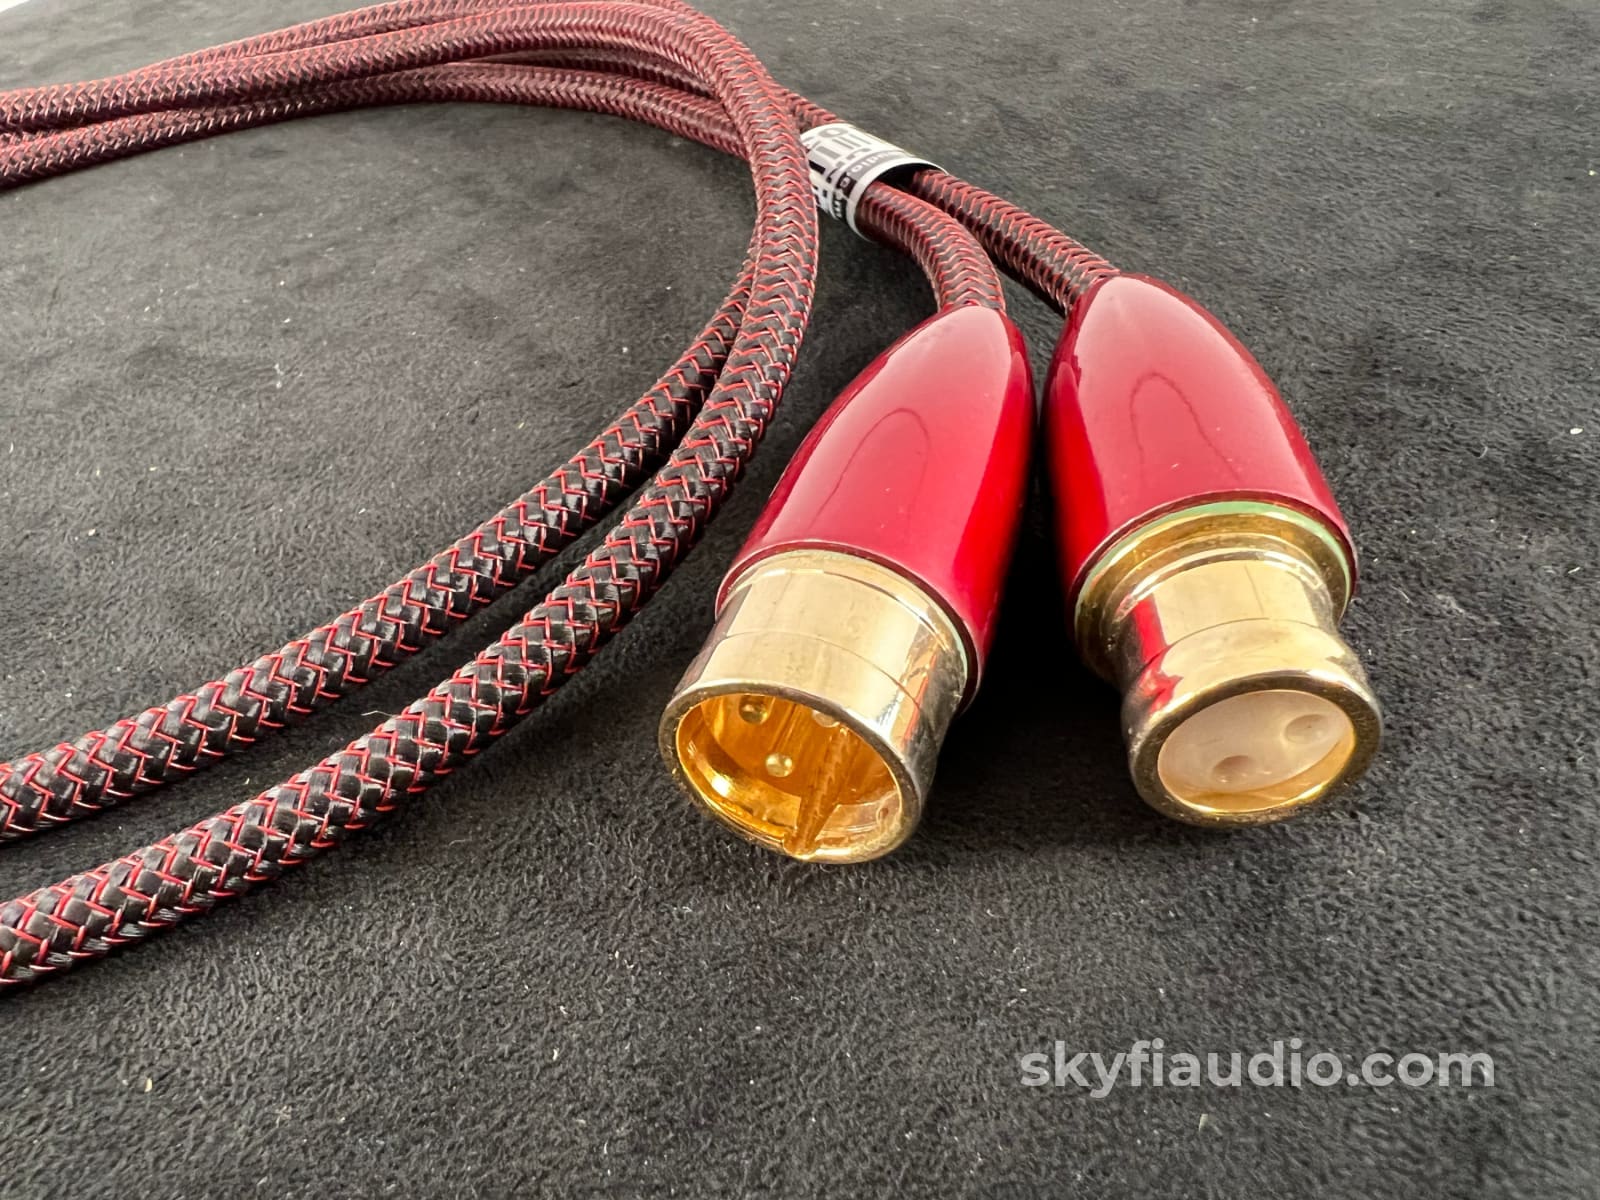 Audioquest Red River Xlr Interconnects (Pair) - 1.5M Cables